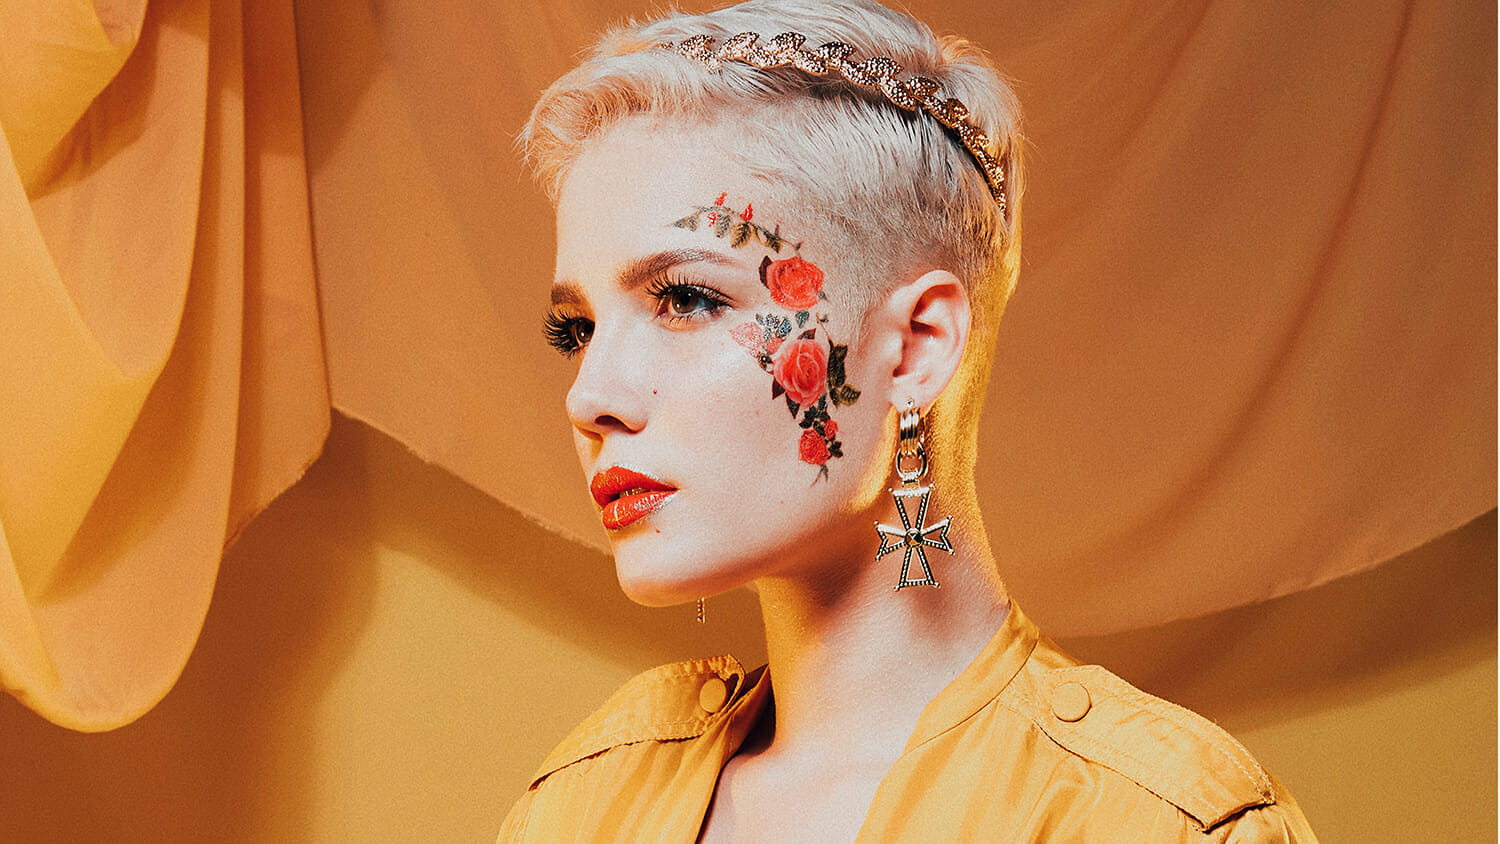 Watch Halsey Perform 'Bad At Love' And 'Him & I' With G Eazy On SNL, Dancing Astronaut